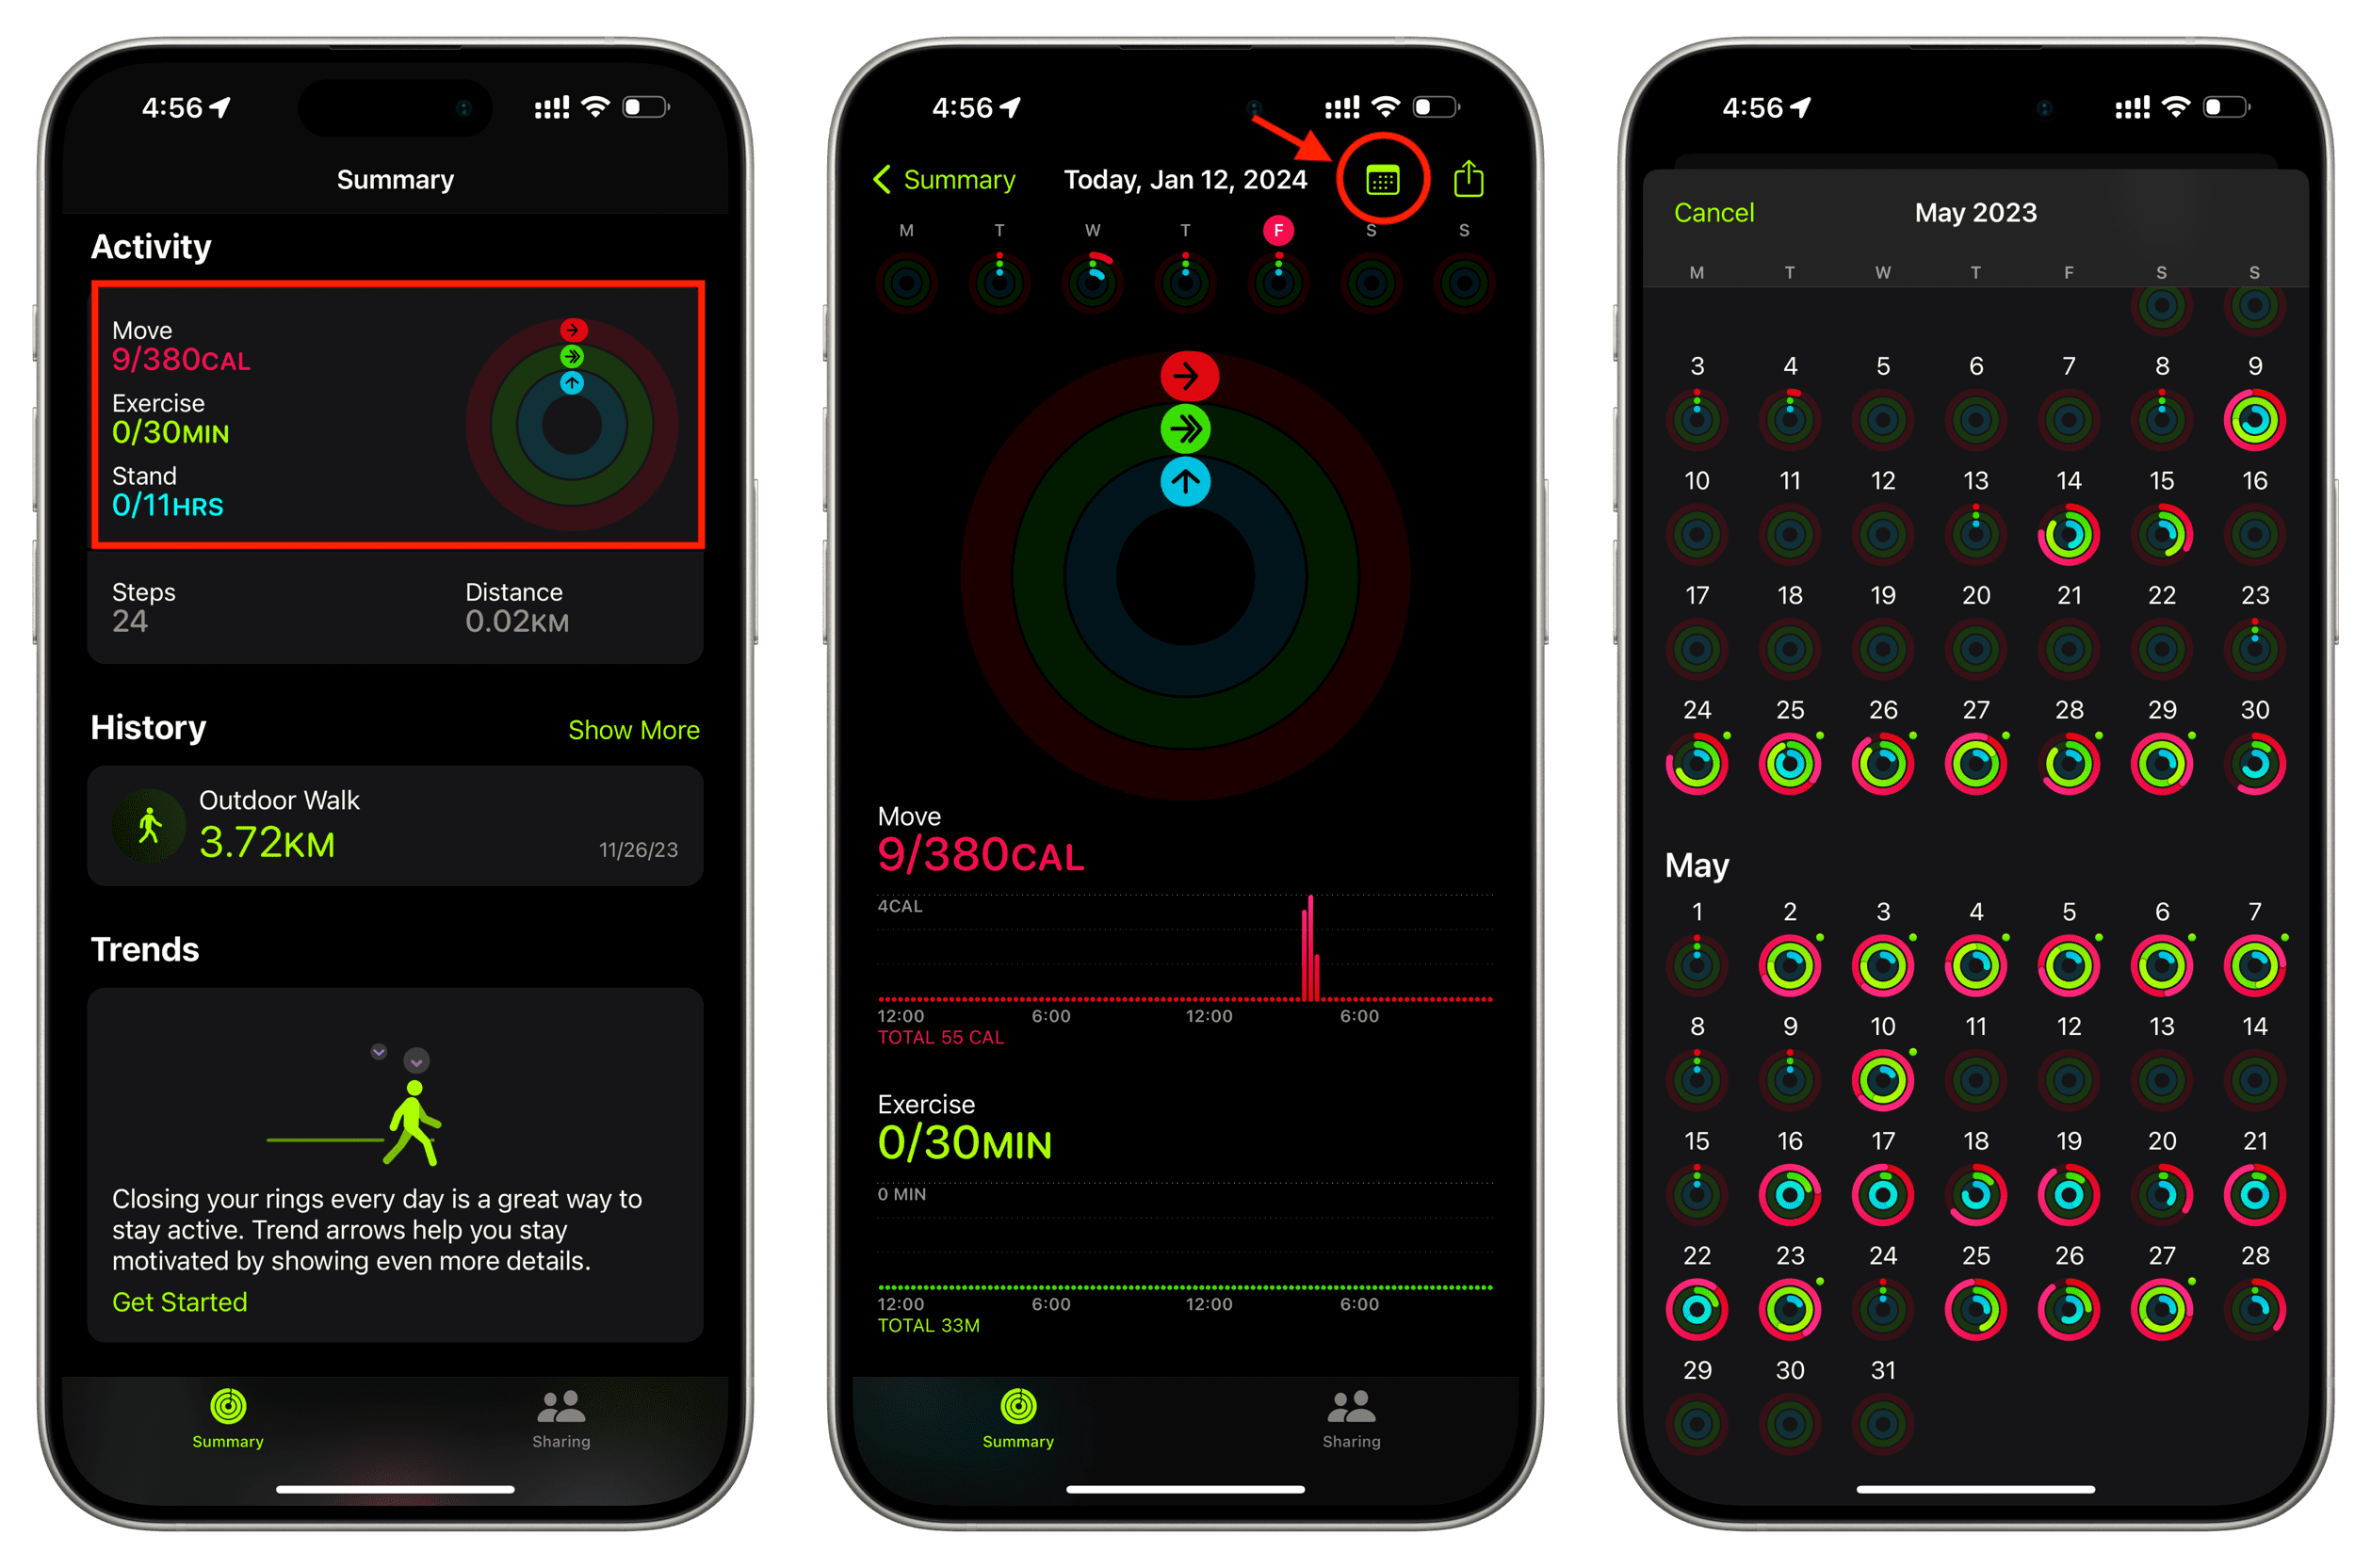 See all past Activity Rings in monthly view in iPhone Fitness app